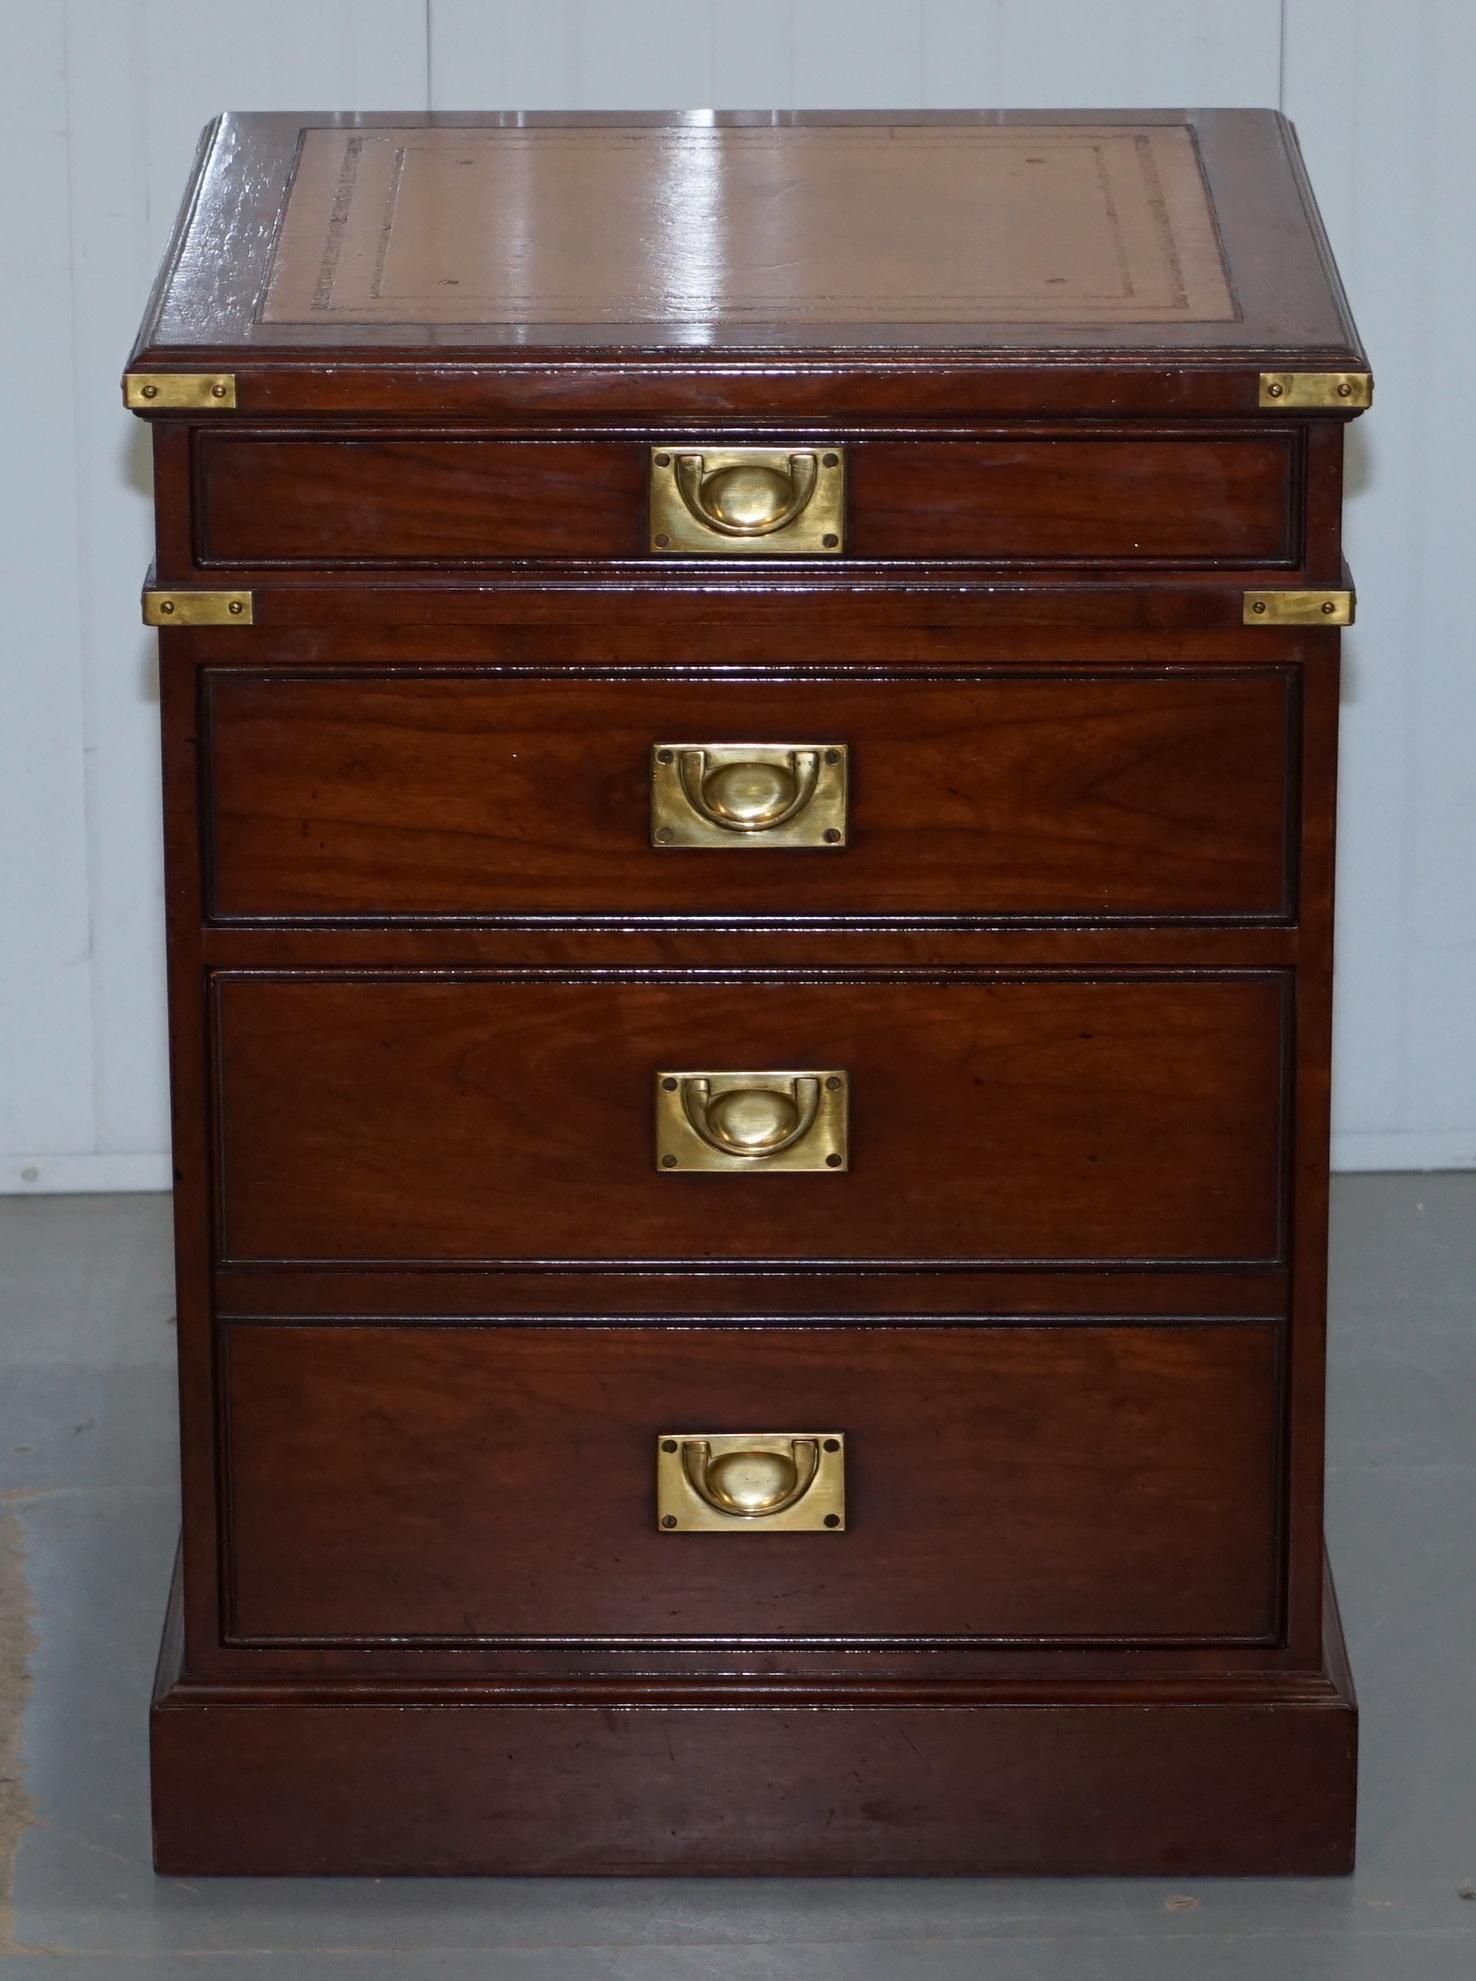 We are delighted to offer for sale this stunning RRP £3000 Harrods London R.E.H Kennedy Furniture handmade in England pedestal desk with drawers and filing cabinet with sliding top and brown leather writing surface

A very well-made functional